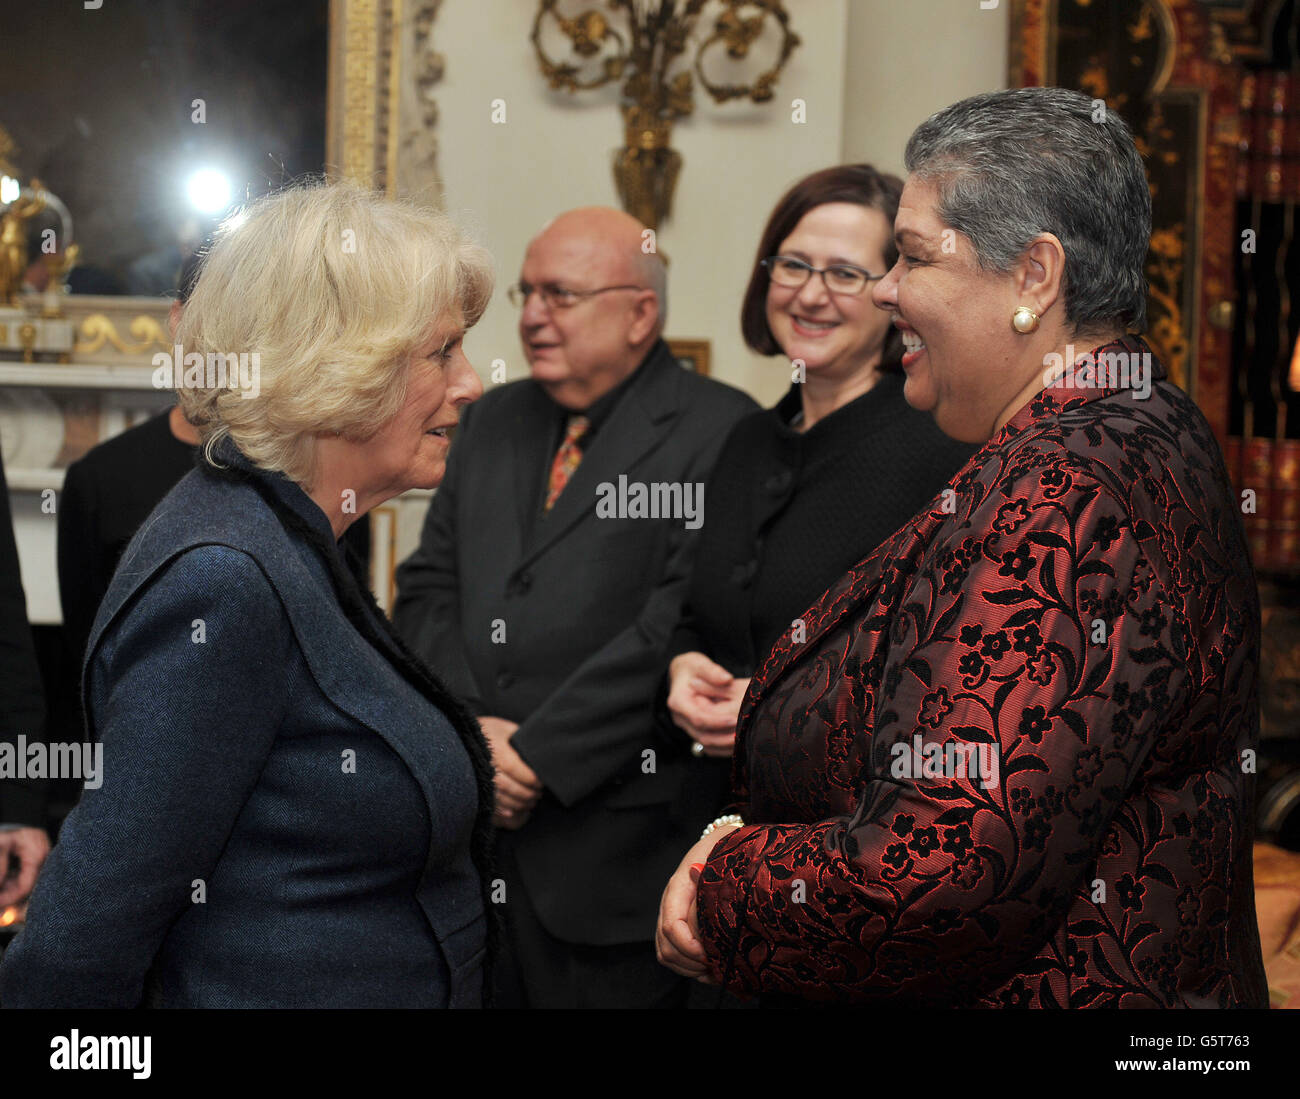 The Duchess of Cornwall talks to Her Excellency the High Commissioner of Jamaica Ms Aloun Ndombet-Assamba, during a reception for High Commissioners representing Commonwealth realm nations at Clarence House in central London. Stock Photo